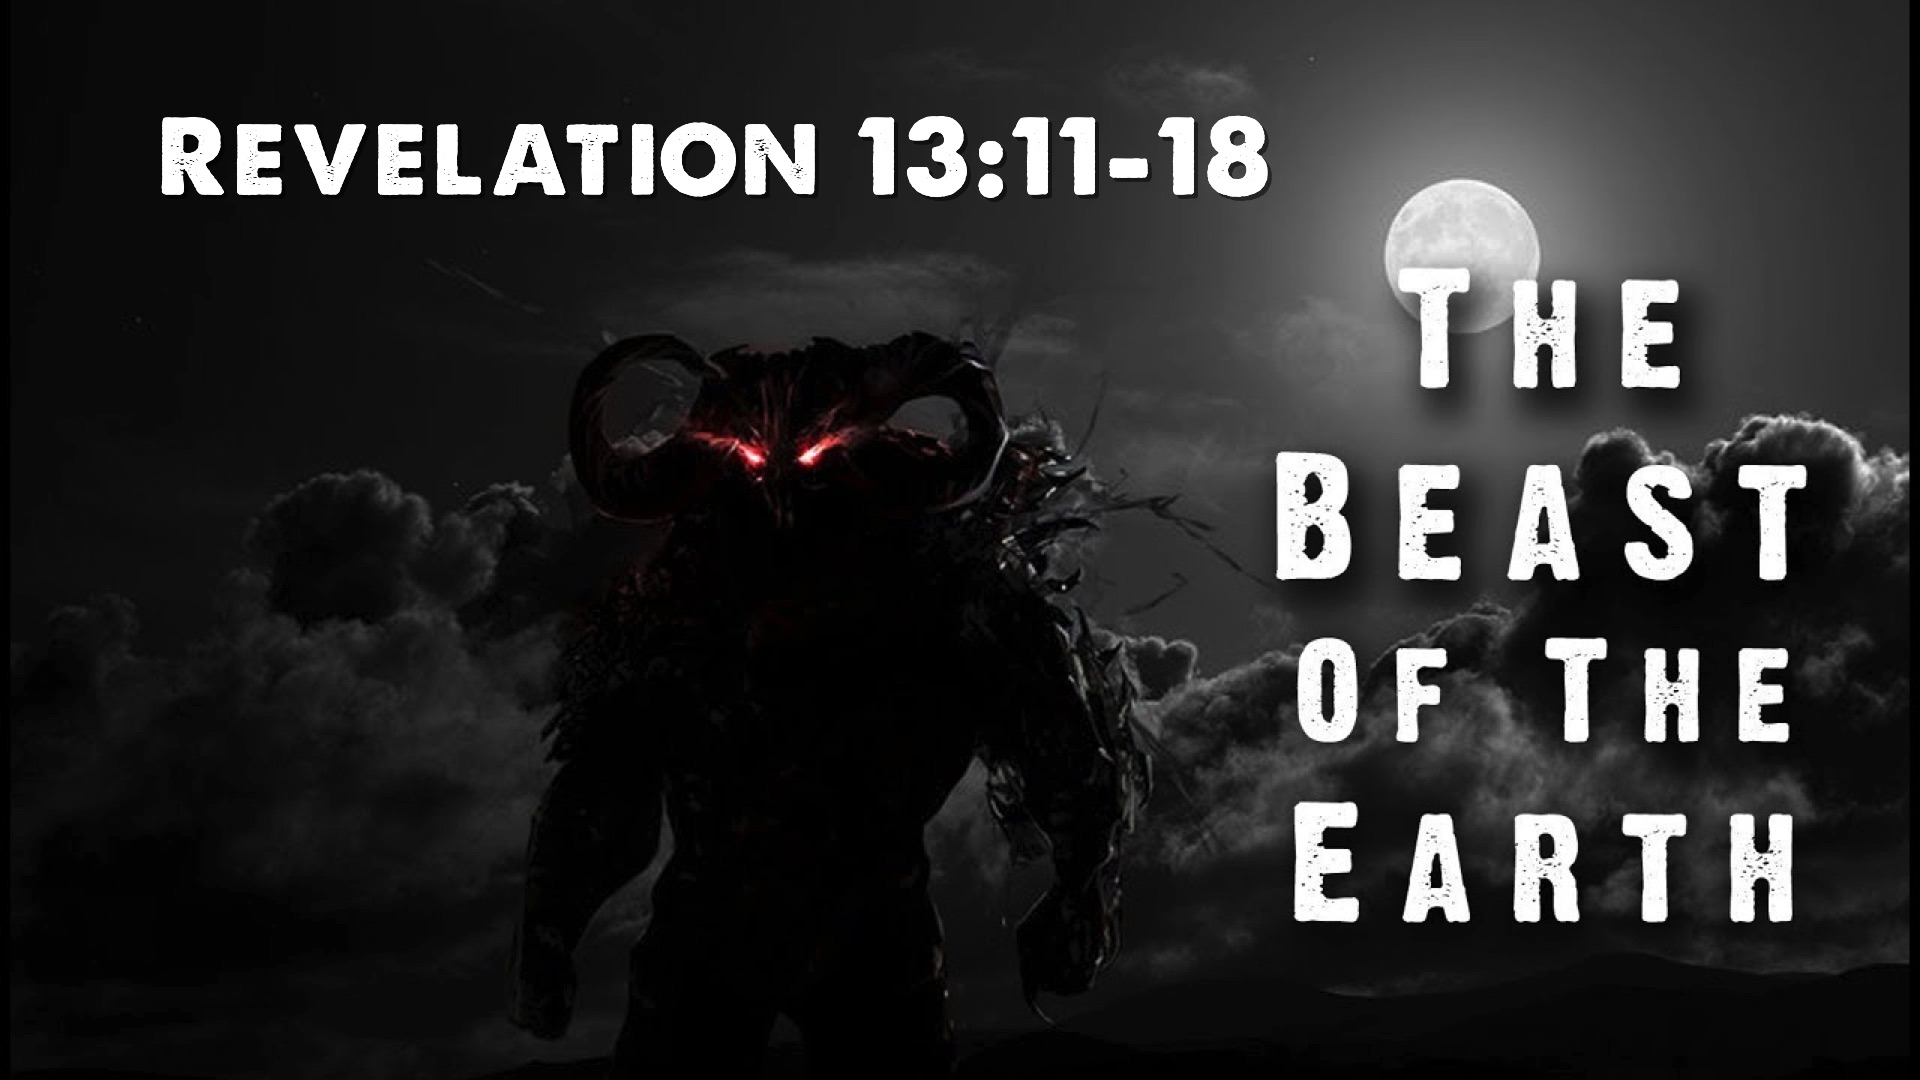 “The Book of Revelation: The Beast of the Earth”